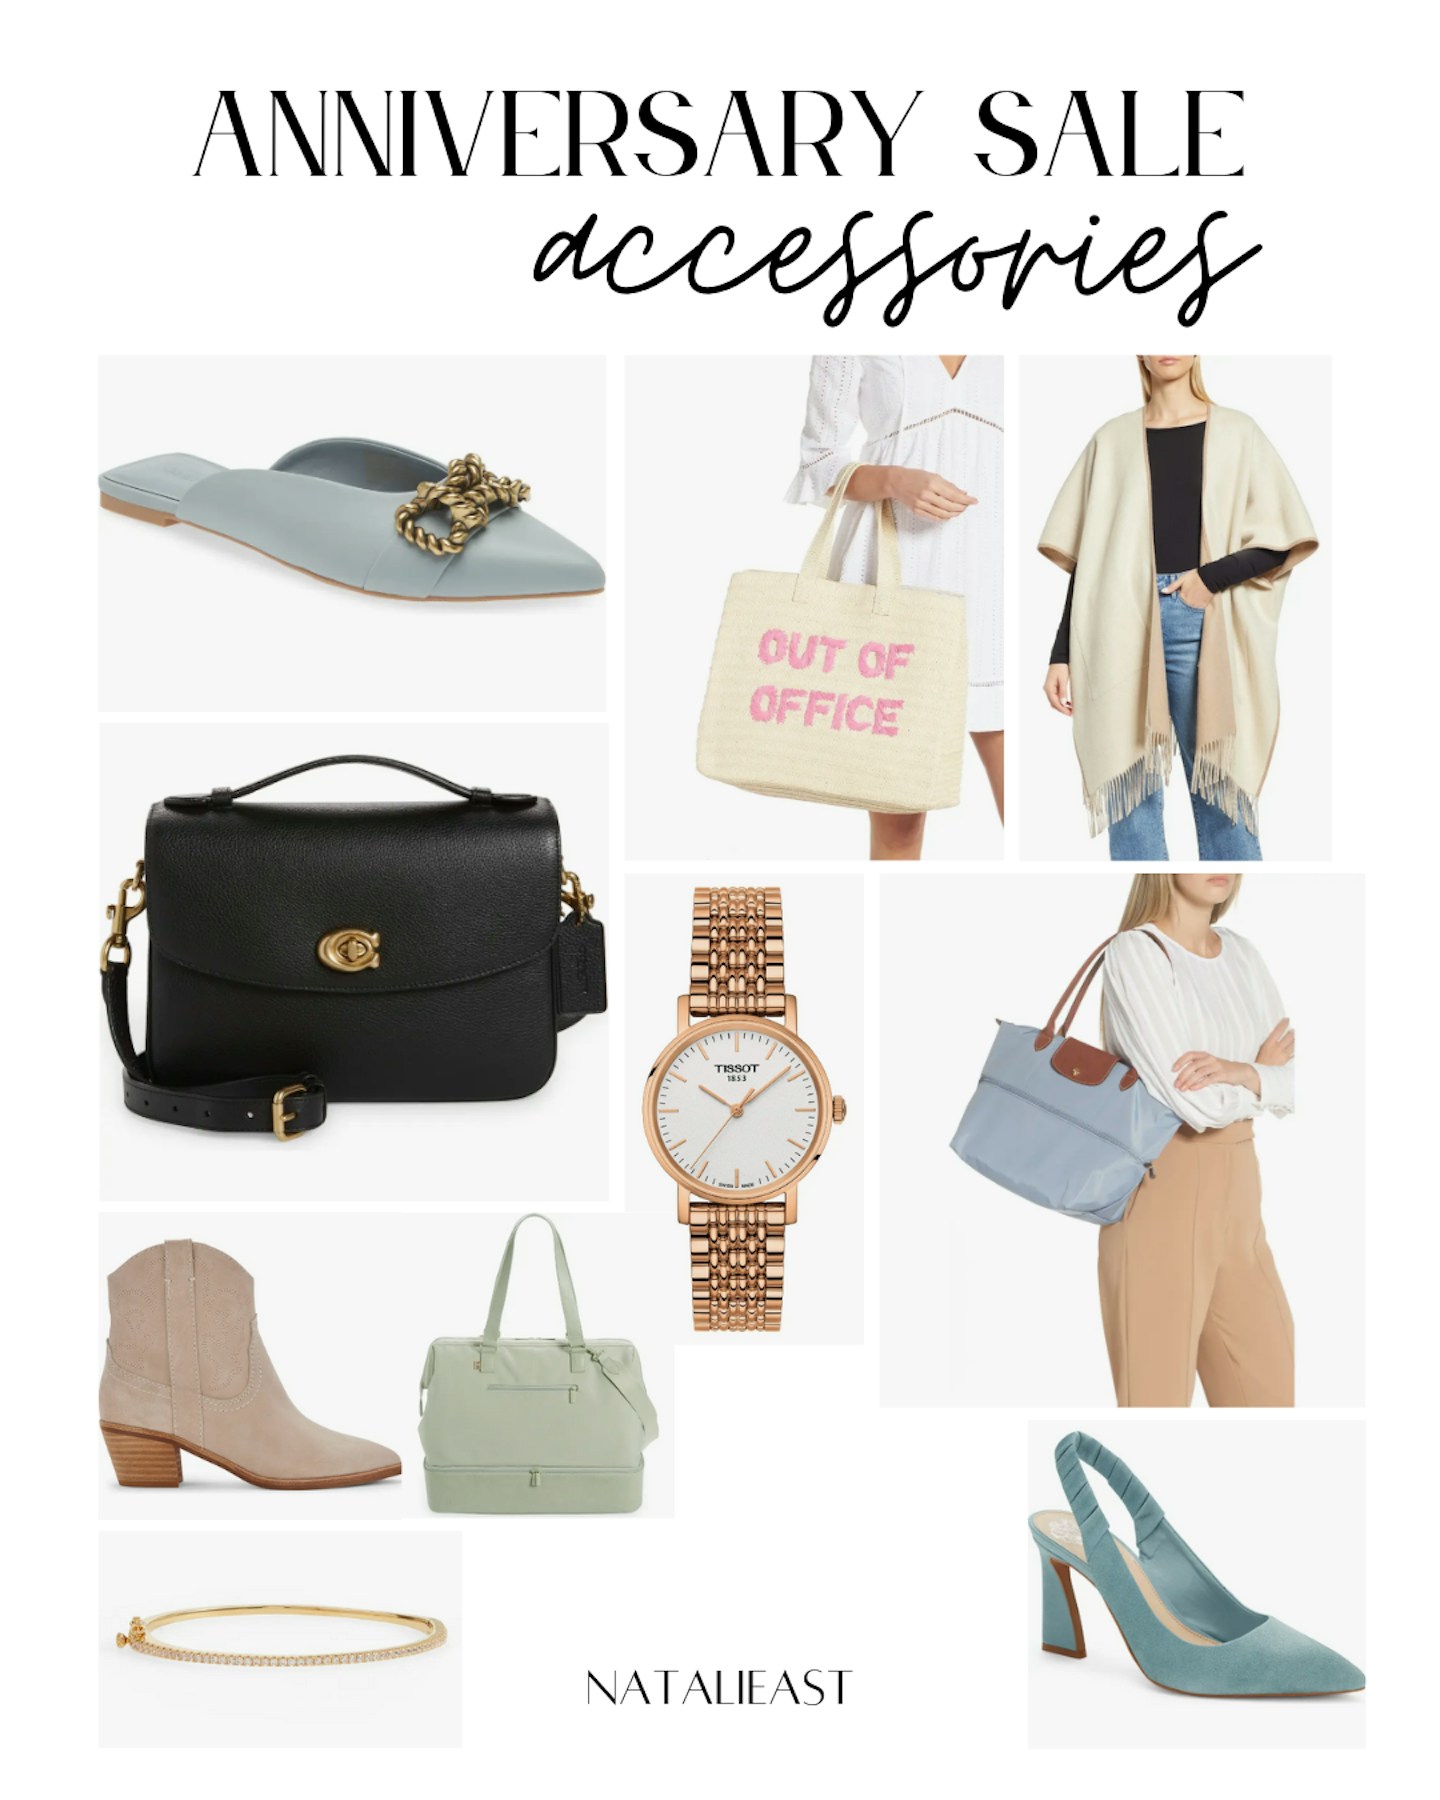 Best Accessories, Shoes, Jewelry & Travel at the Nordstrom Anniversary Sale 2022